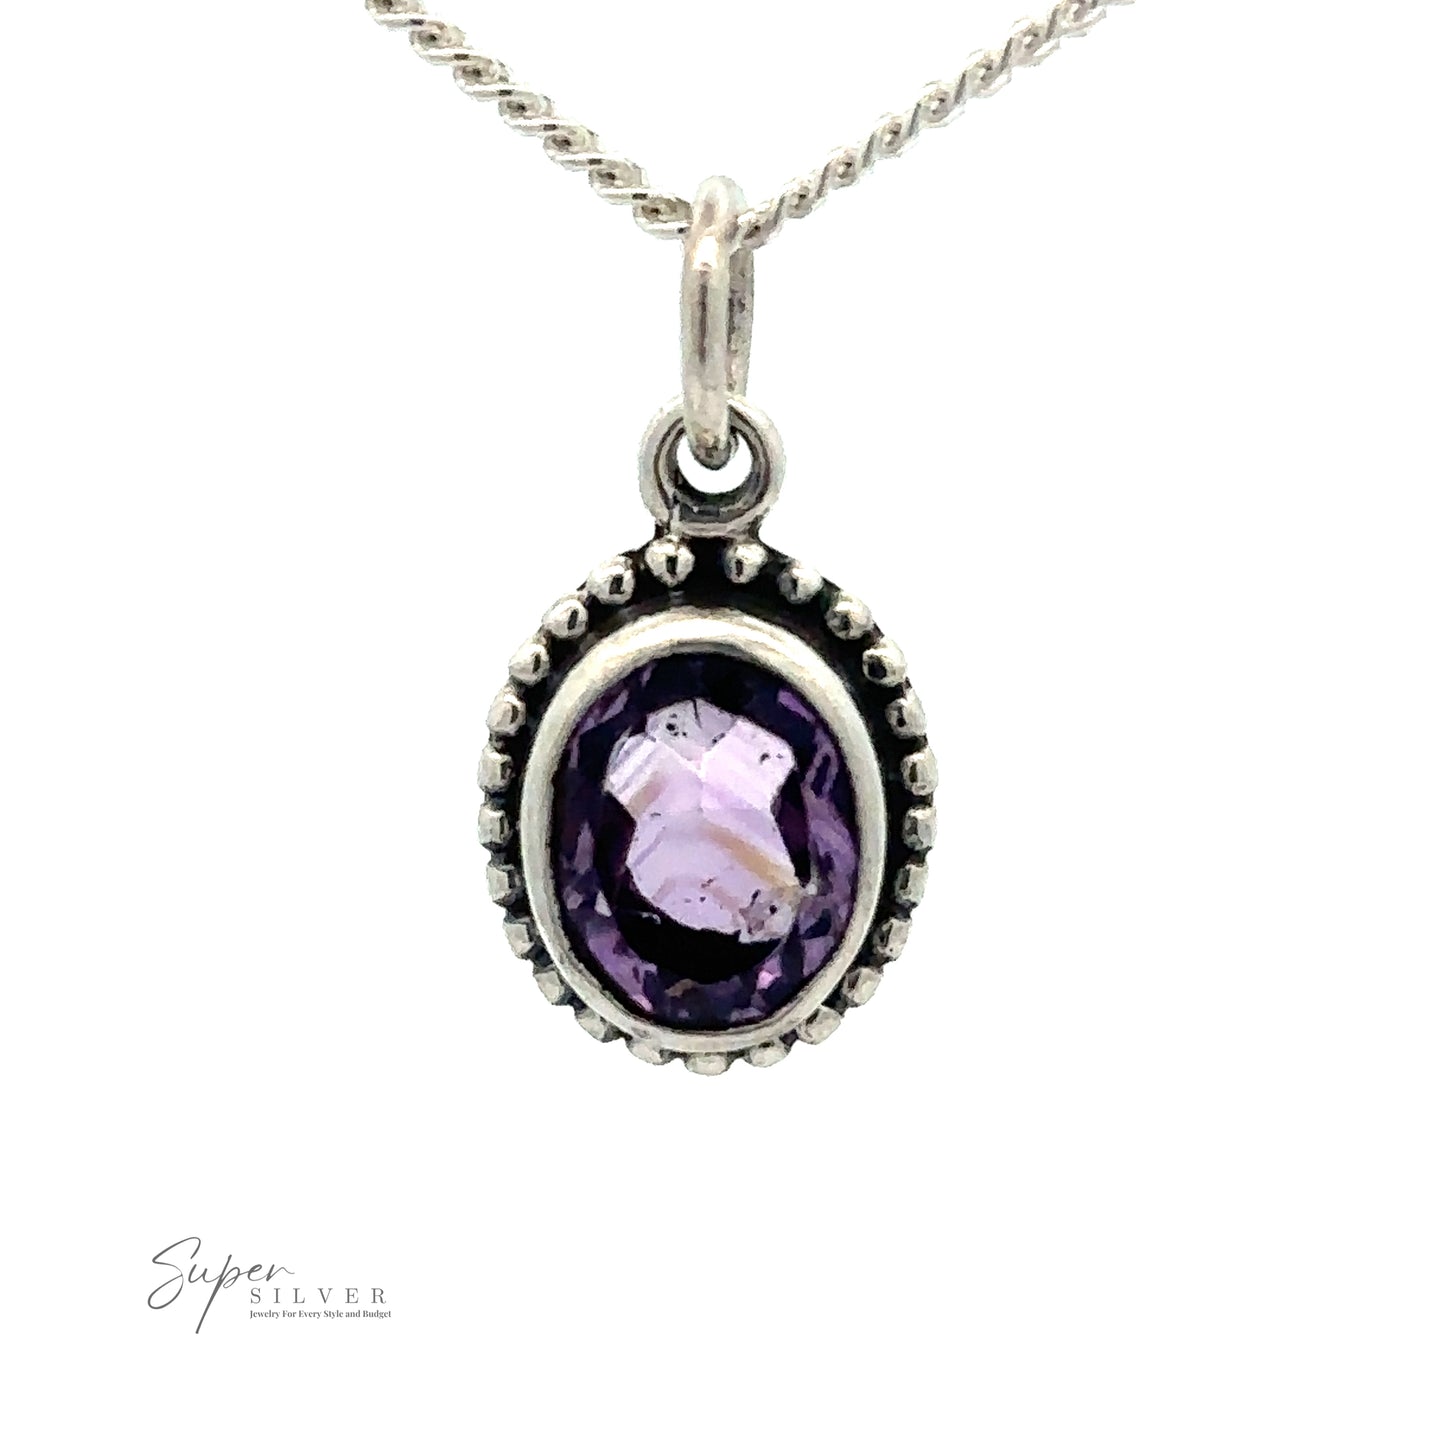 An Oval Faceted Amethyst Pendant featuring a small, oval-shaped amethyst gemstone encased in a detailed silver bezel setting. This calming accessory is completed with a twisted rope chain design.